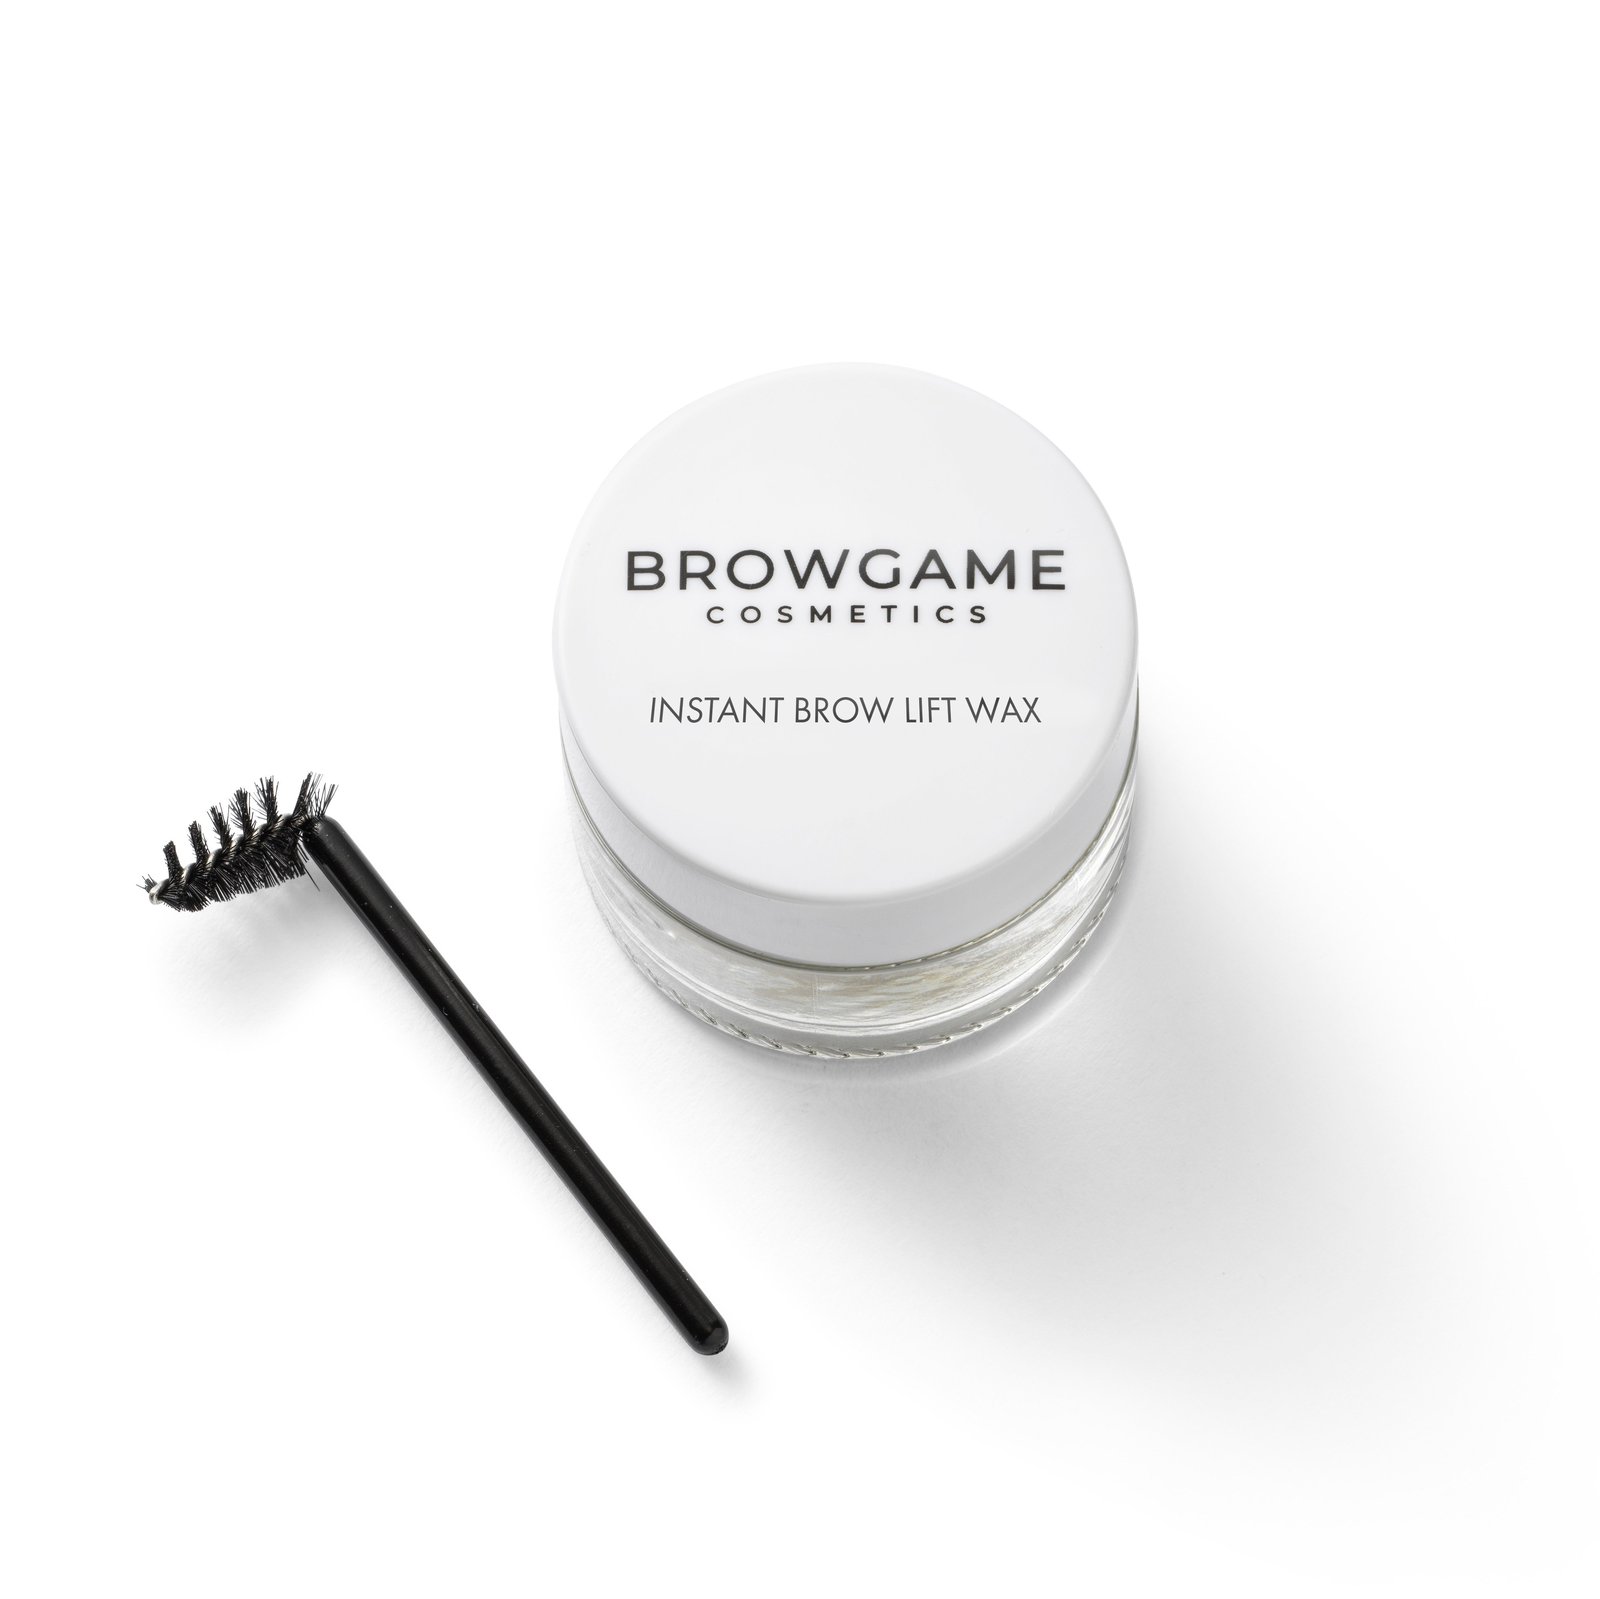 Browgame Cosmetics Instant Brow Lift Wax 15 g